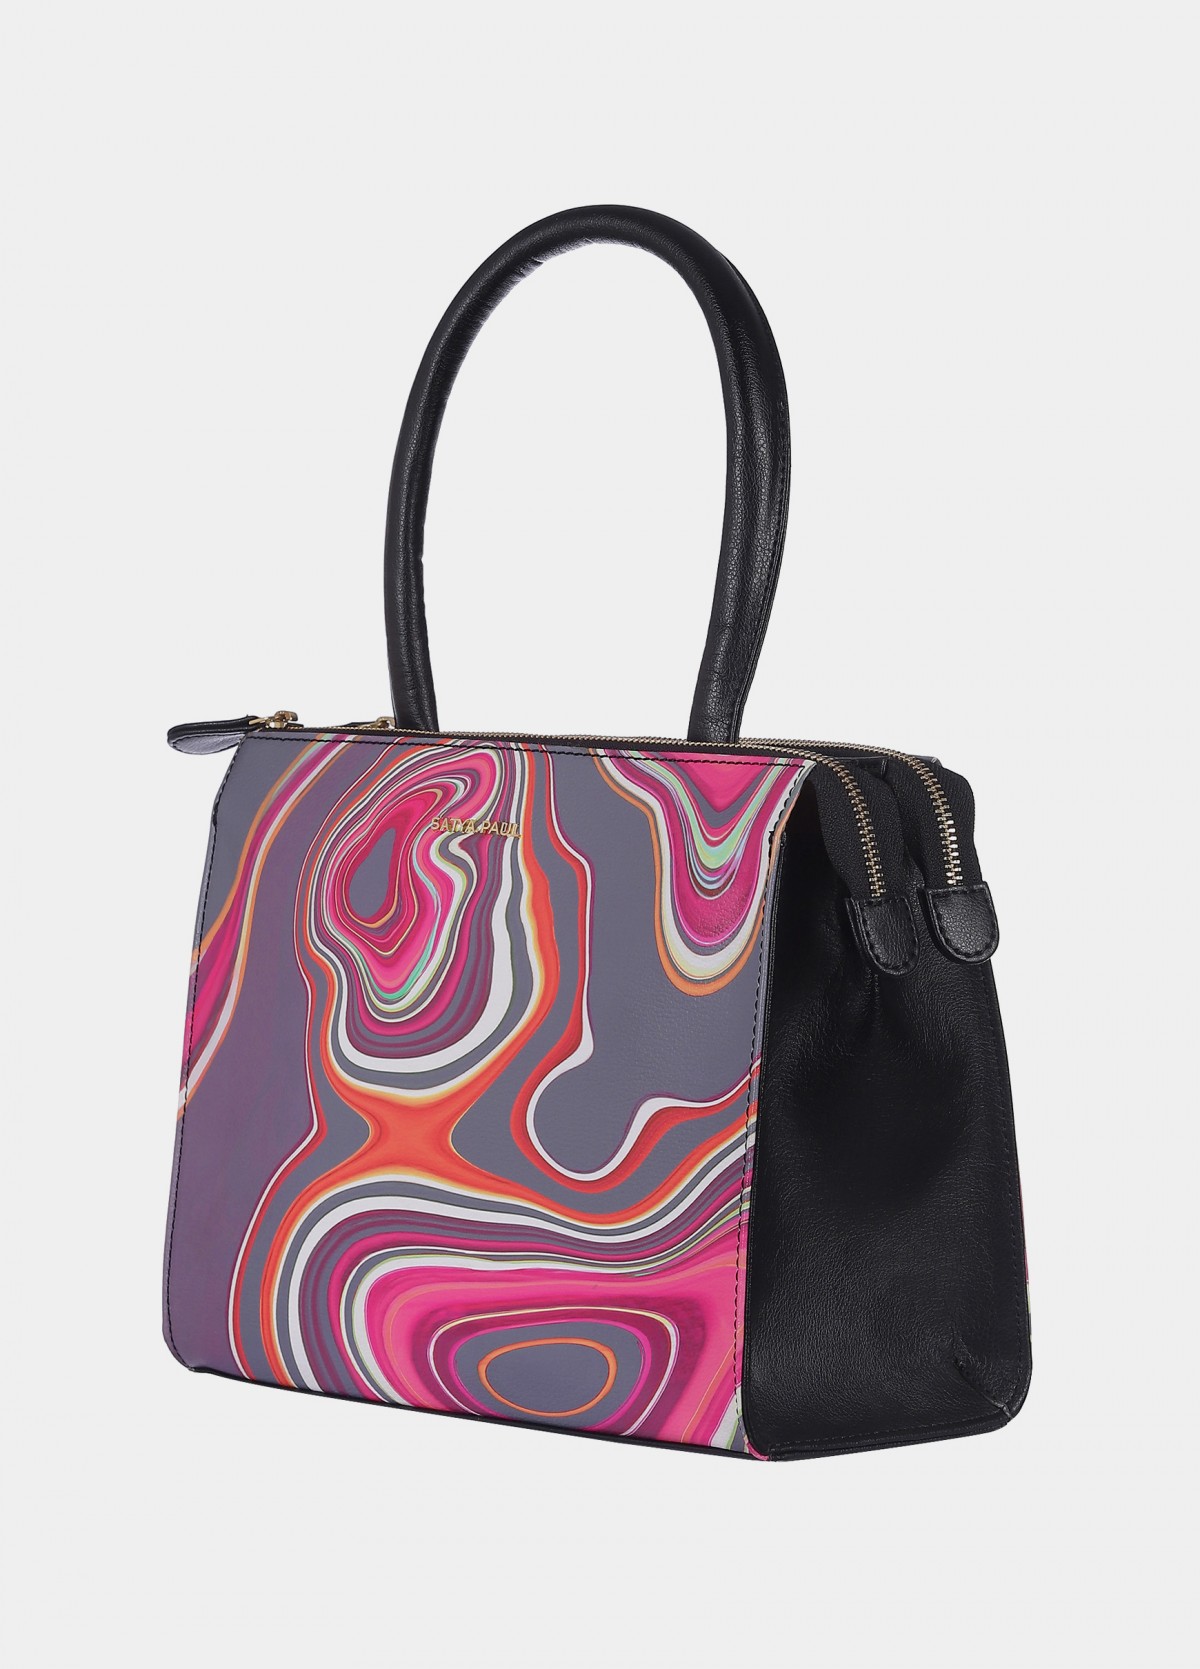 The Psychedelic Bag